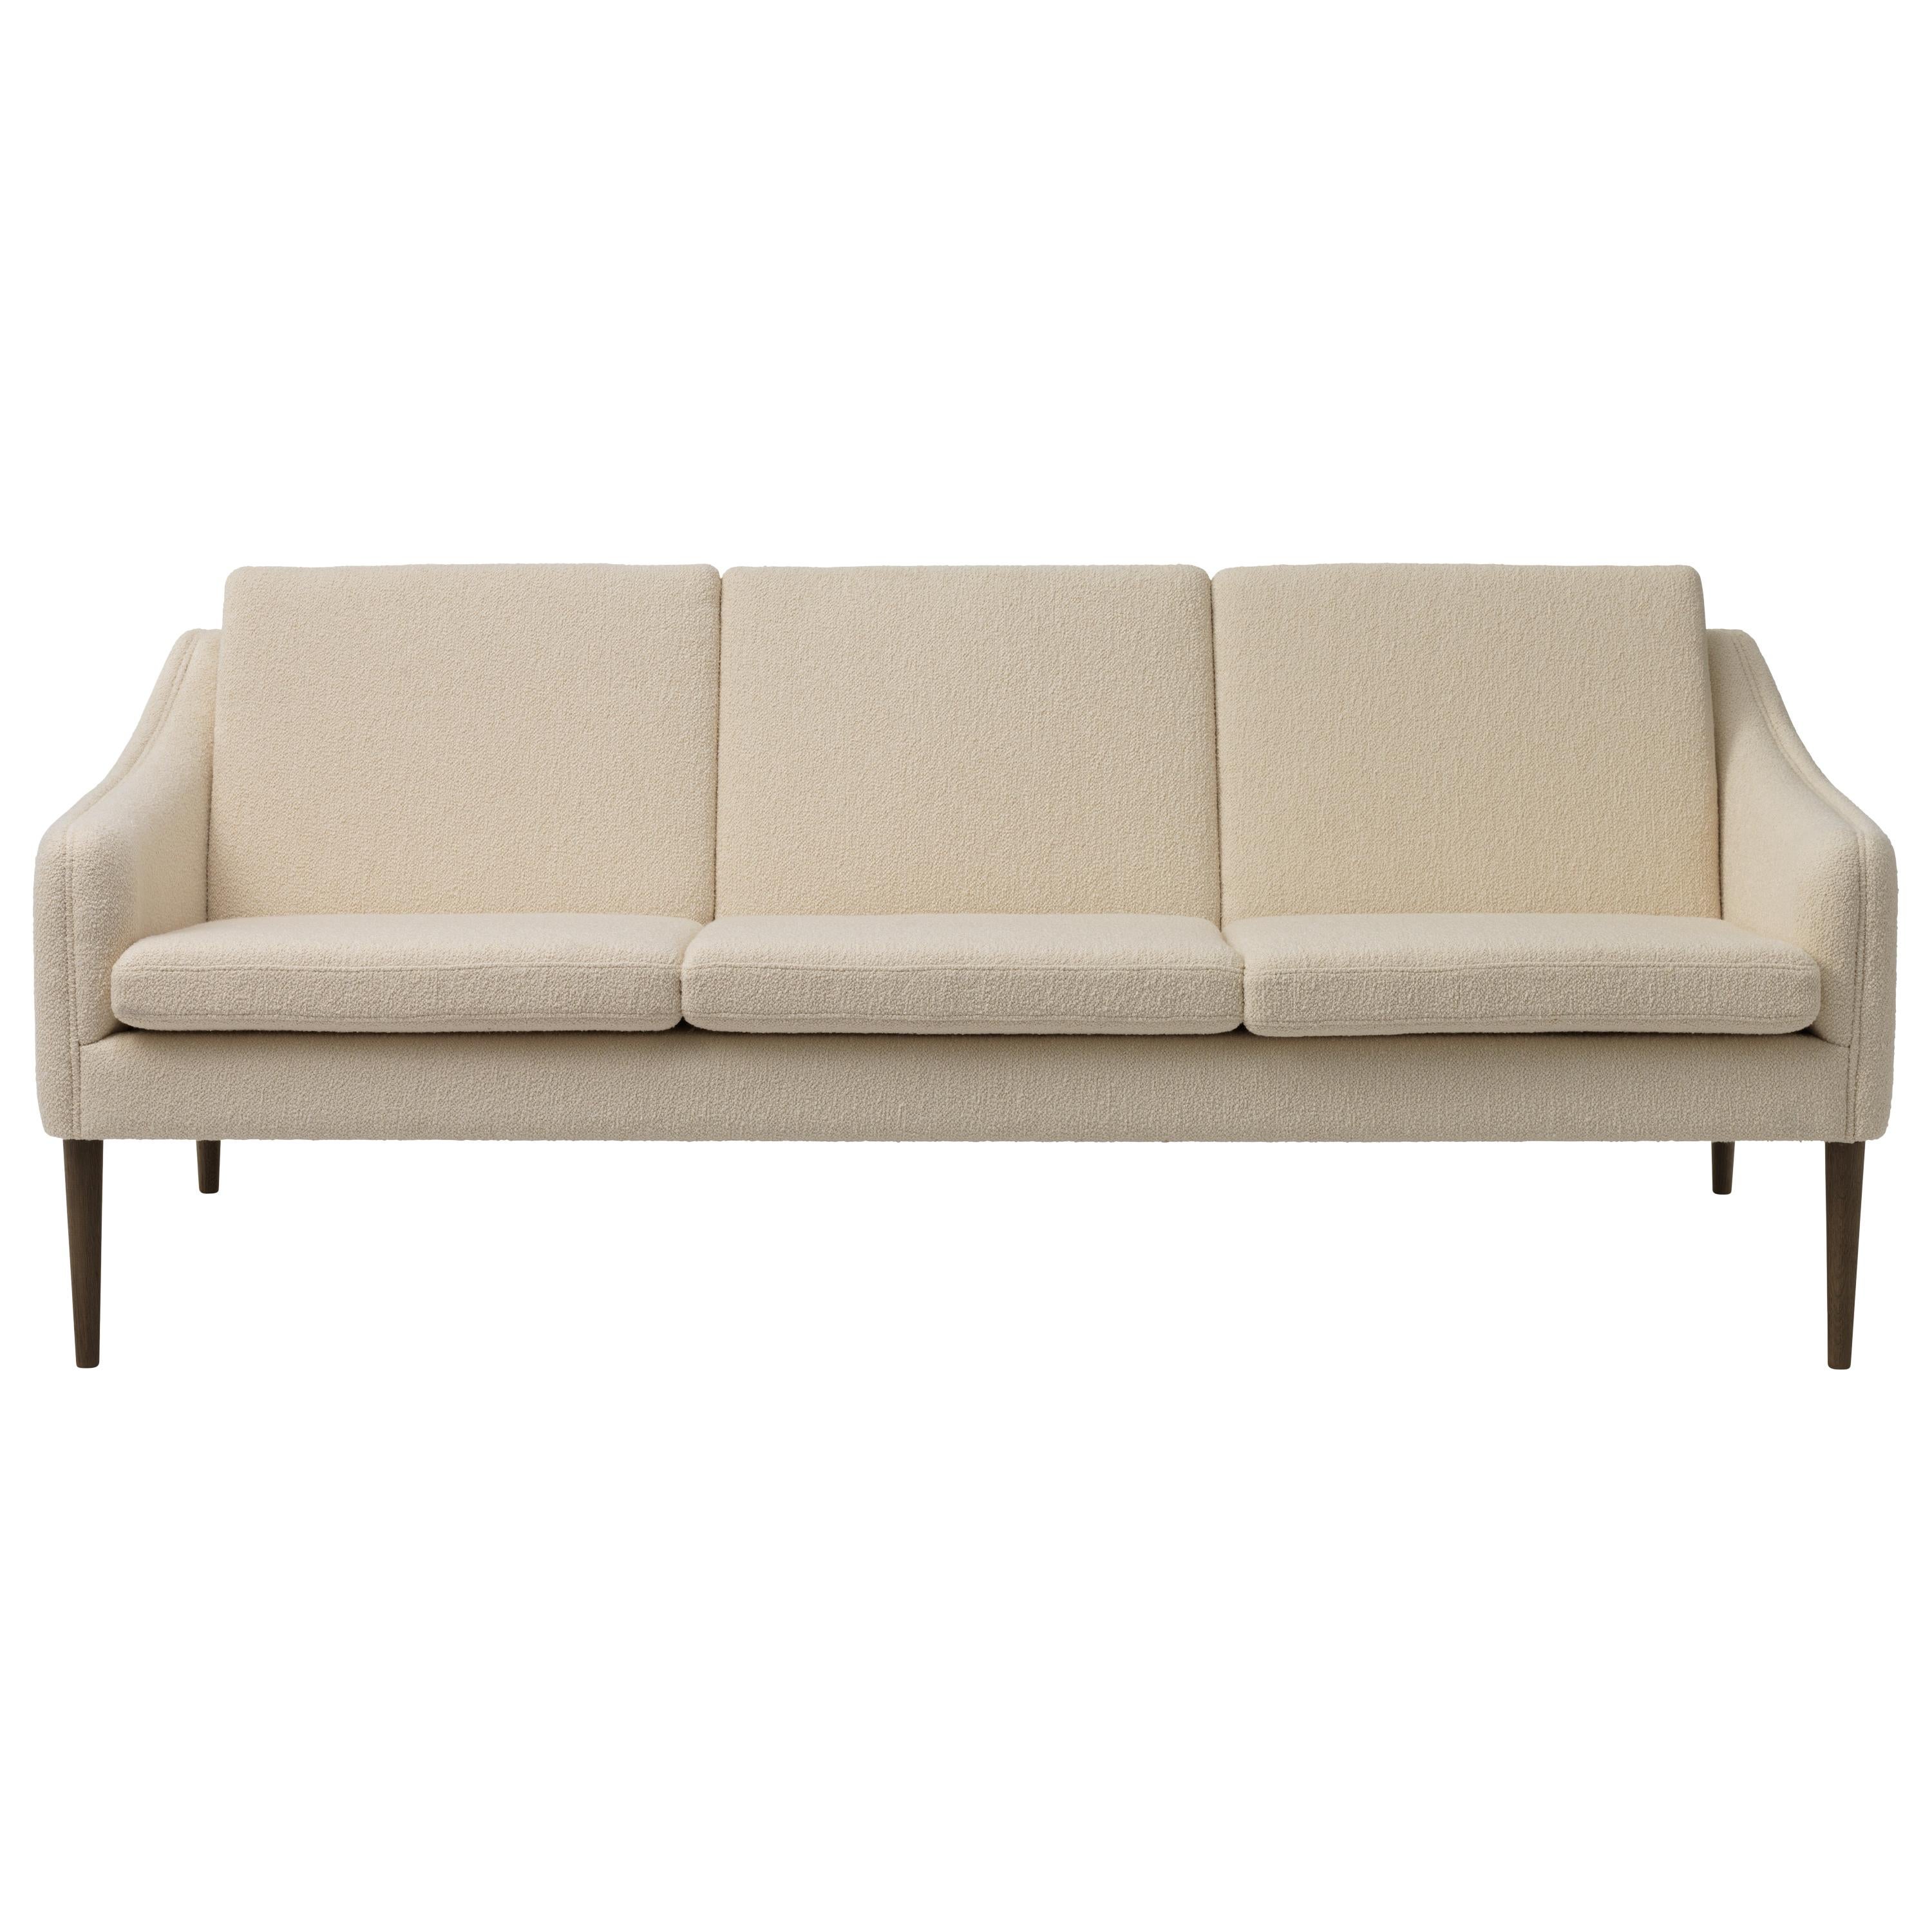 For Sale: White (Barnum 024) Mr. Olsen 3-Seat Sofa with Smoked Oak Legs, by Hans Olsen from Warm Nordic